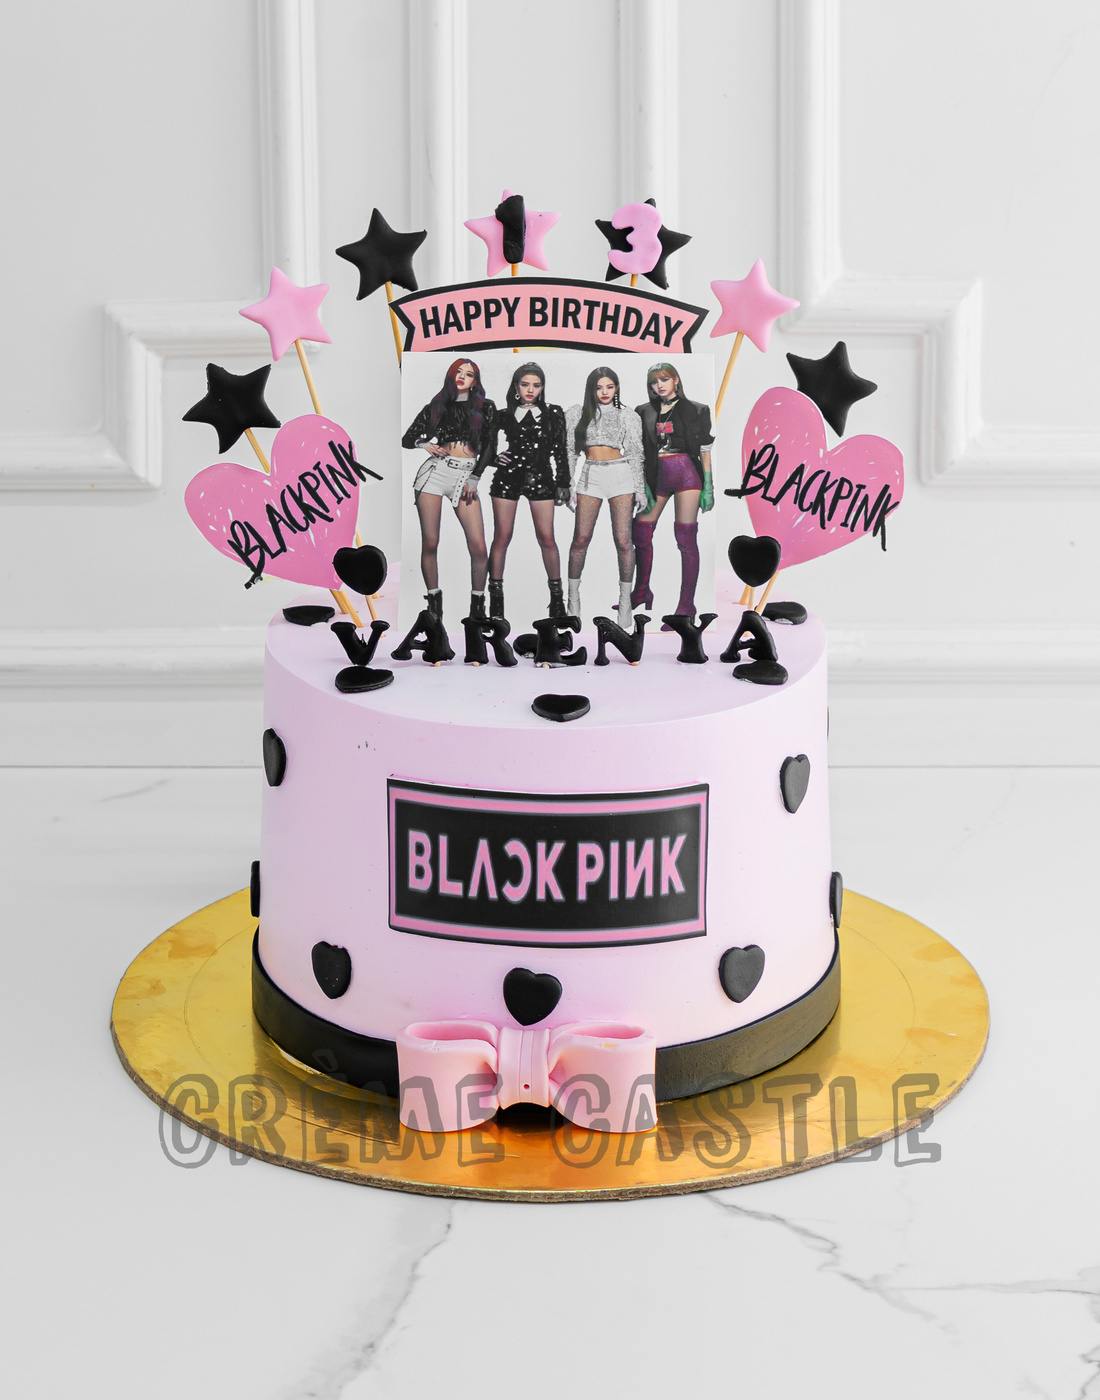 BTS Cake - 1120 – Cakes and Memories Bakeshop